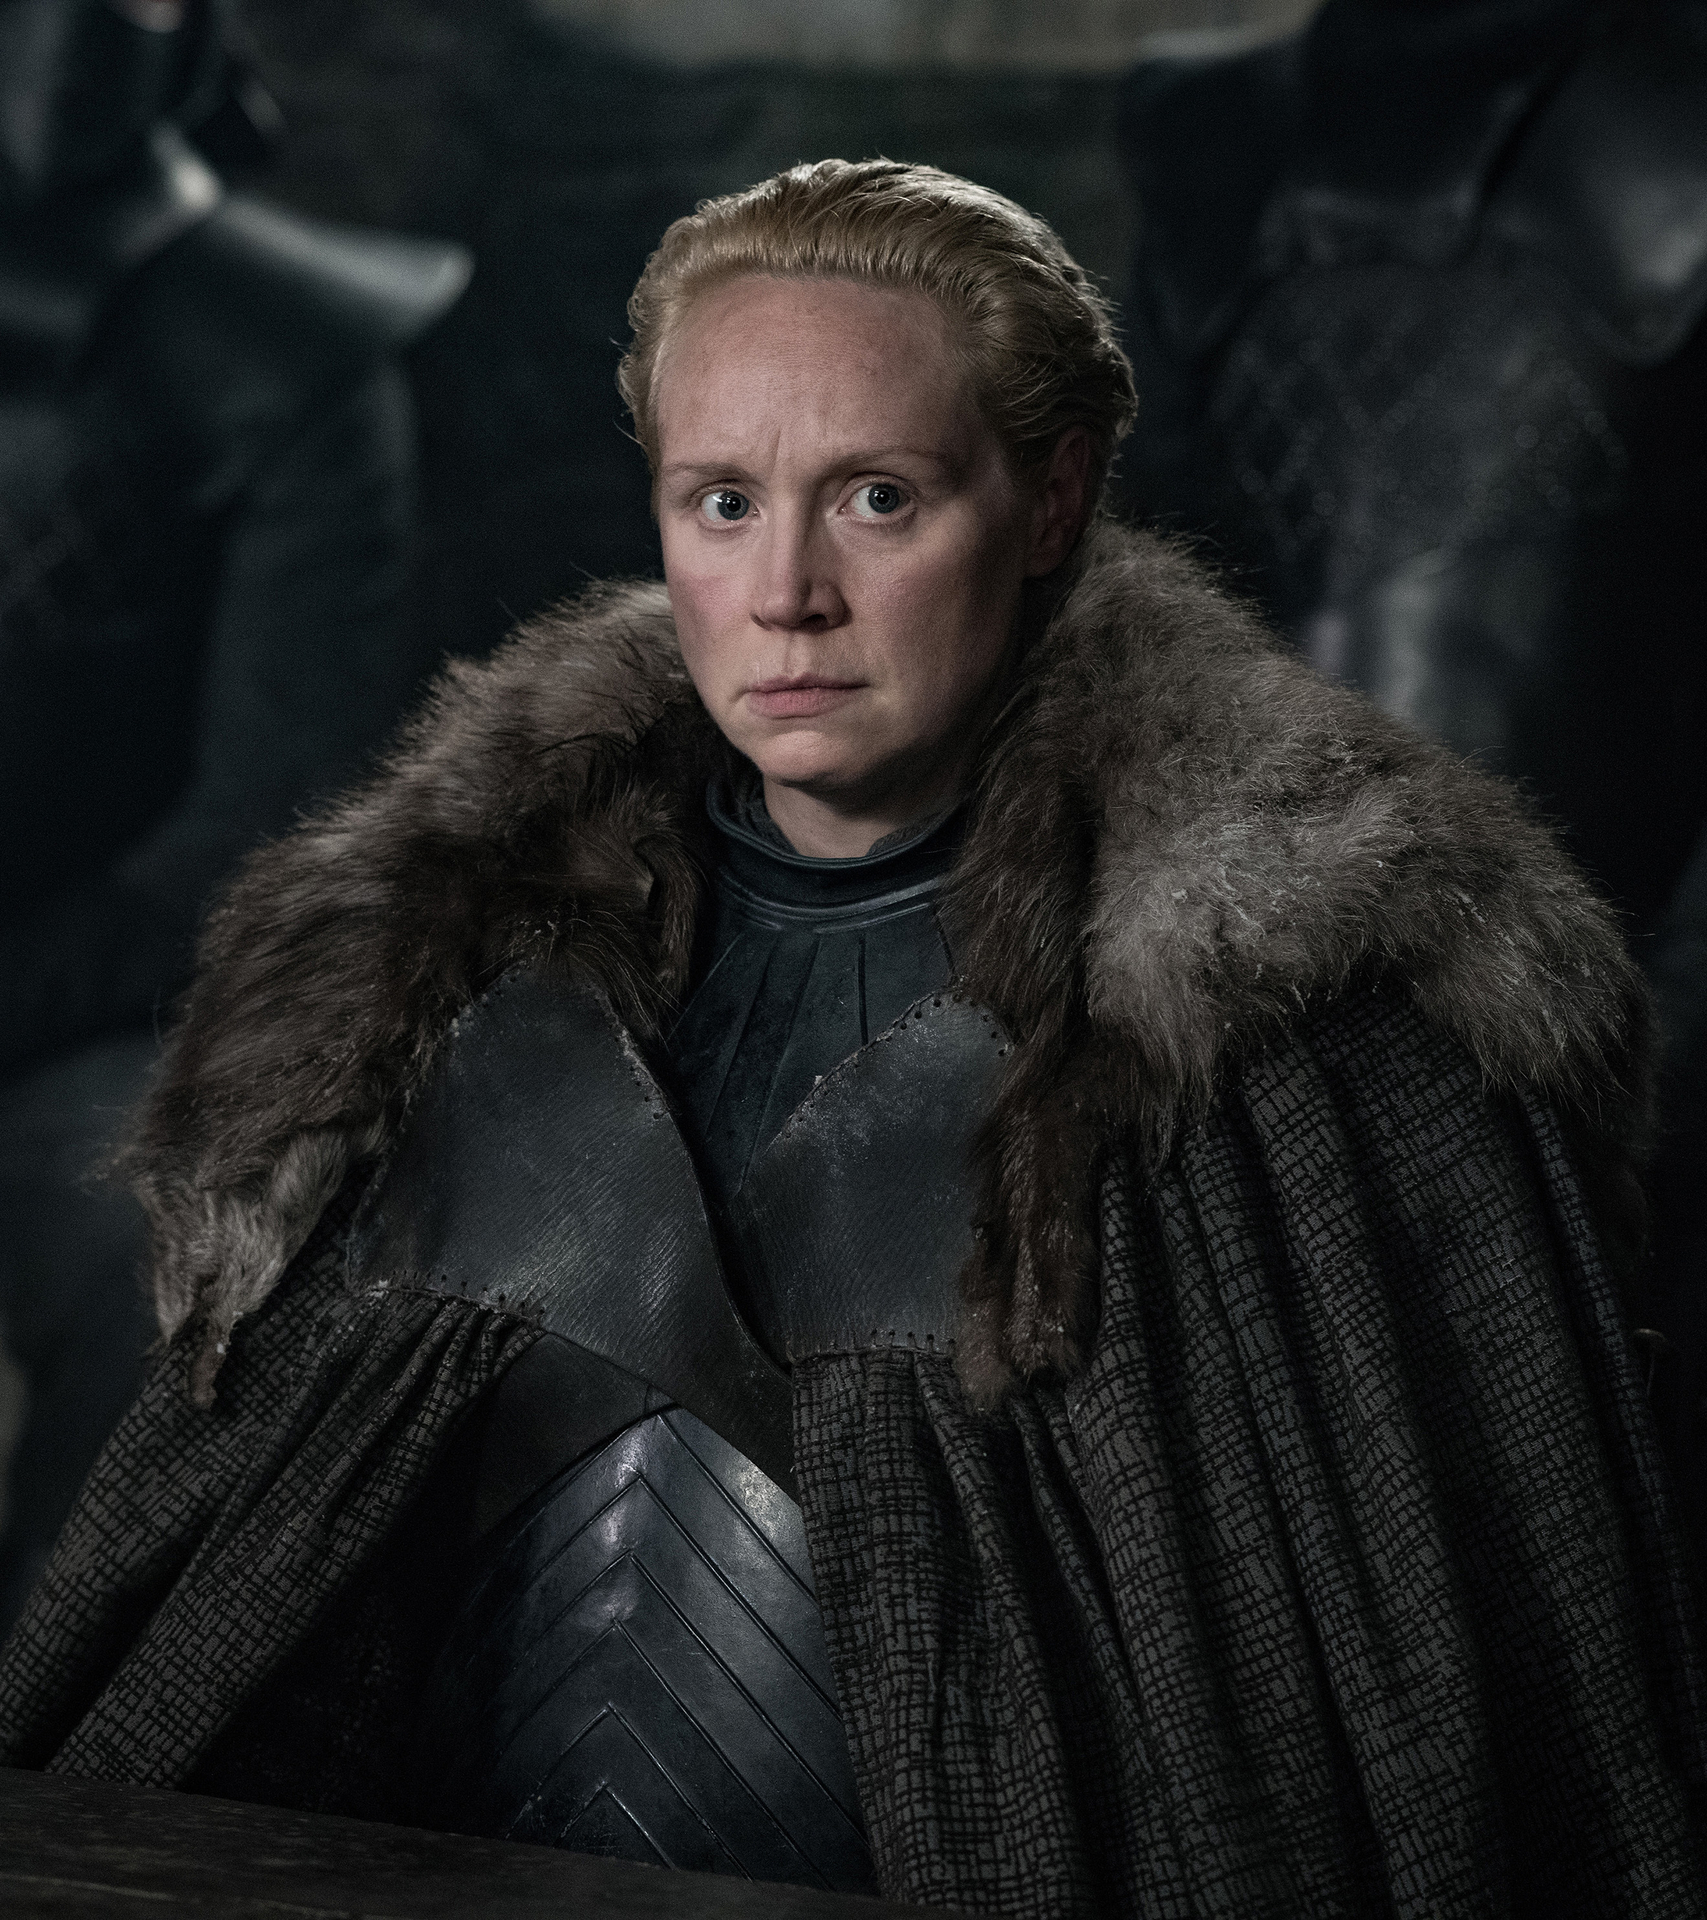 Gwendoline Christie as Brienne of Tarth in armor with a fur cloak from the show &quot;Game of Thrones&quot;